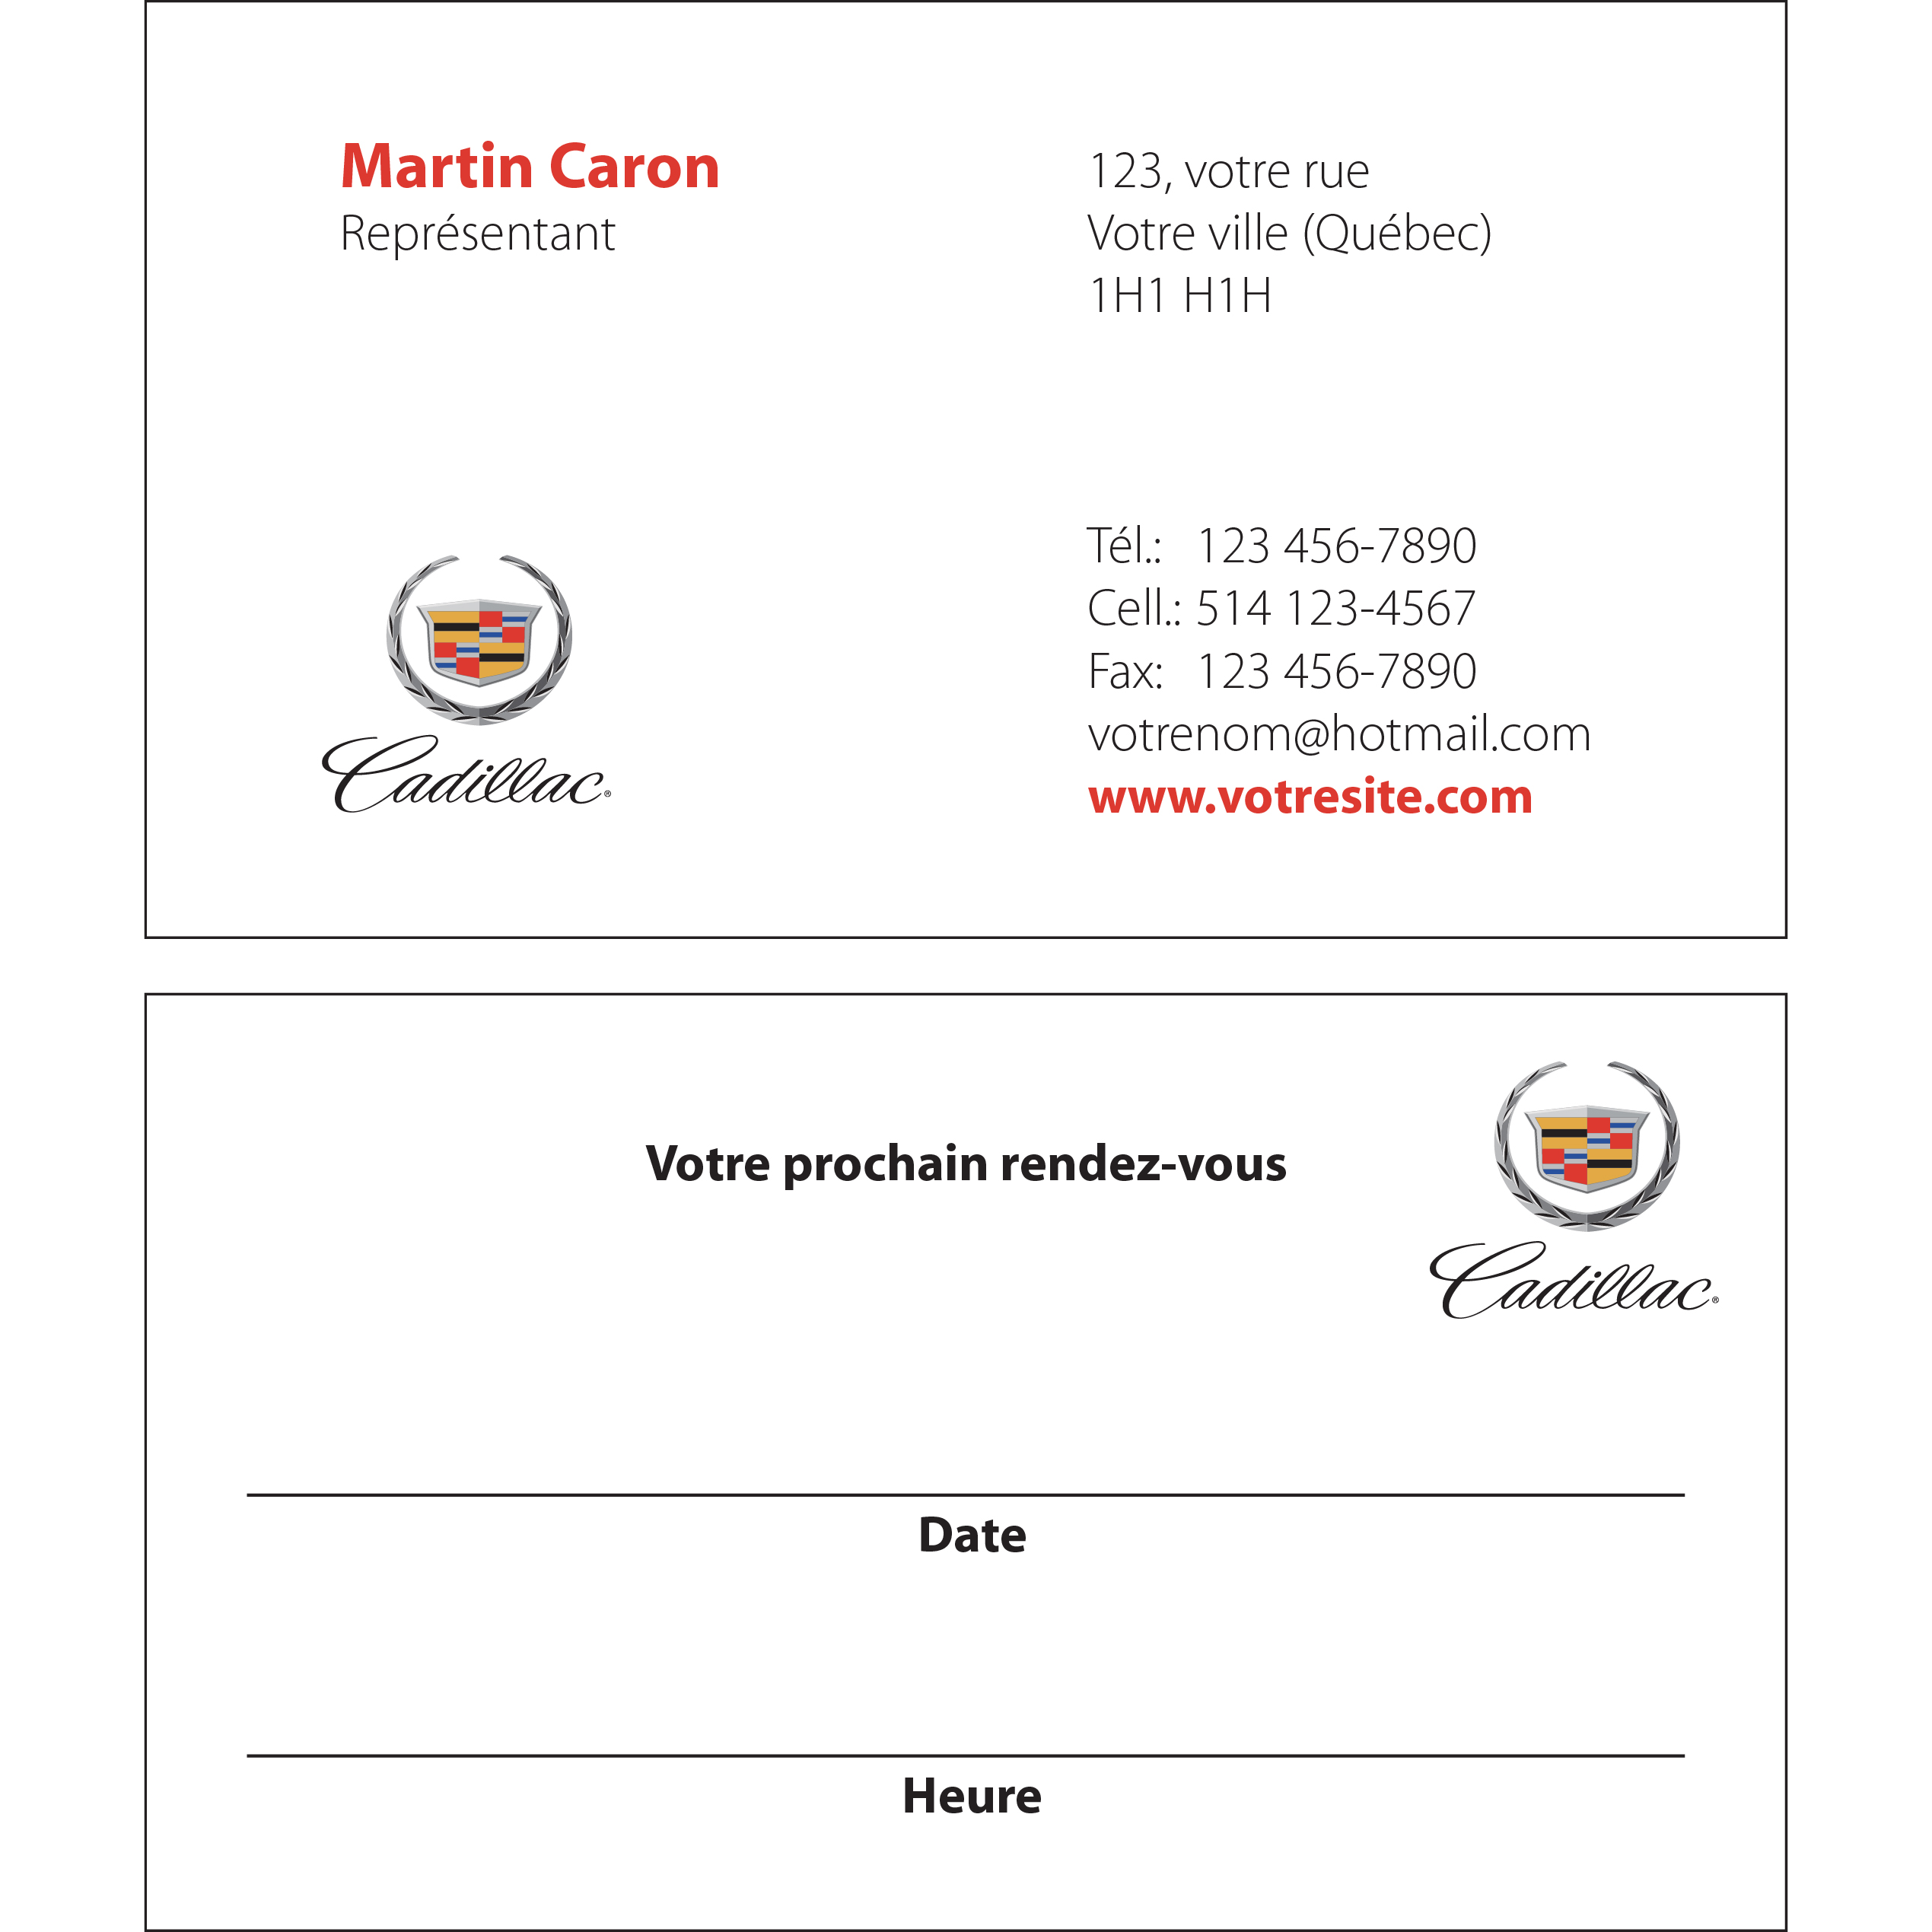 Cadillac Business cards - 2 sides, BCCA04